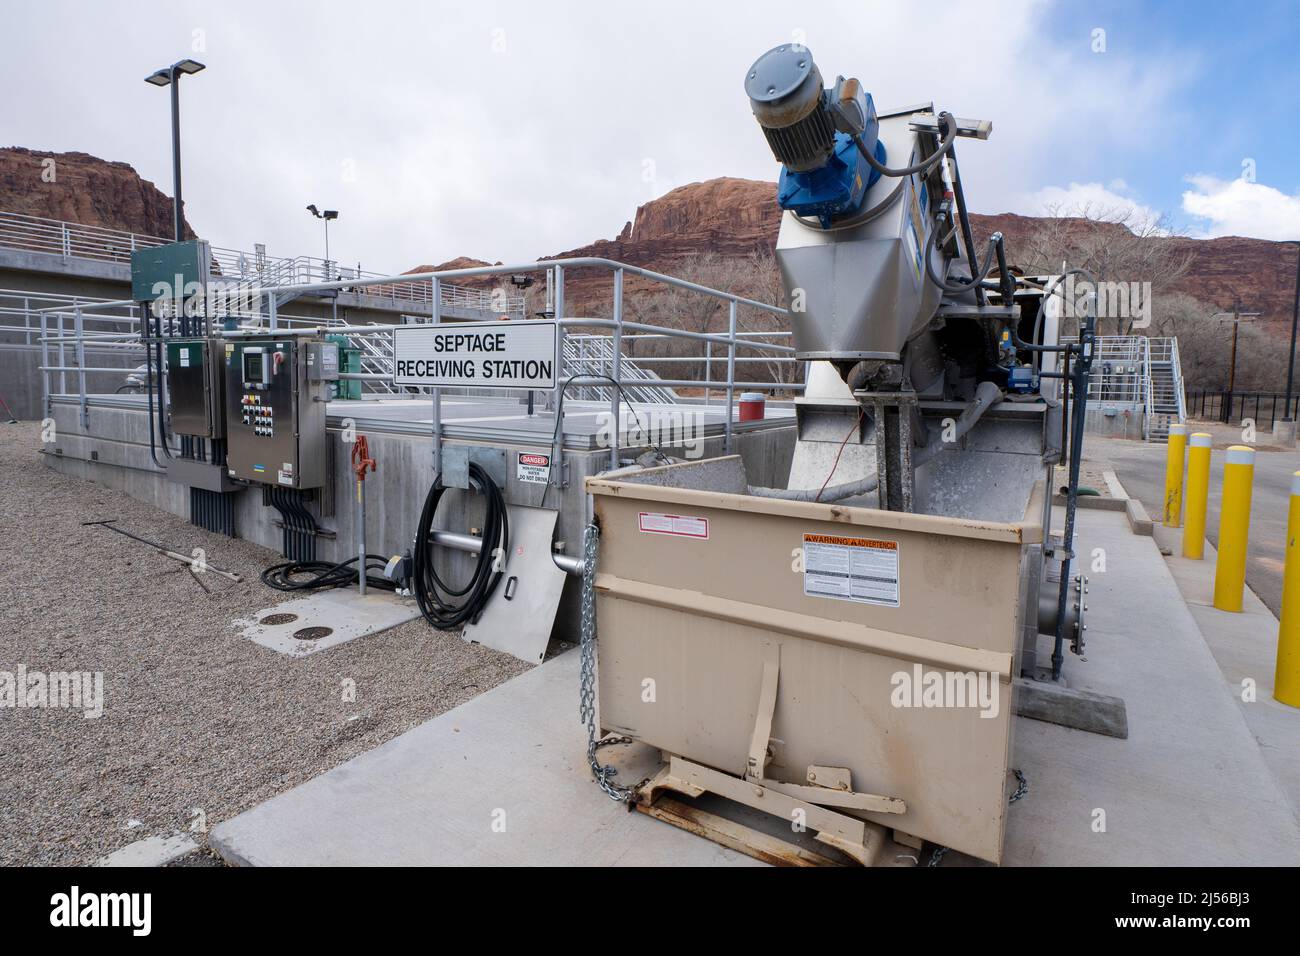 Septage receiving station at an SBR or sequential batch reactor wastewater treatment plant in Moab, Utah.  This station receives sewage influent from Stock Photo